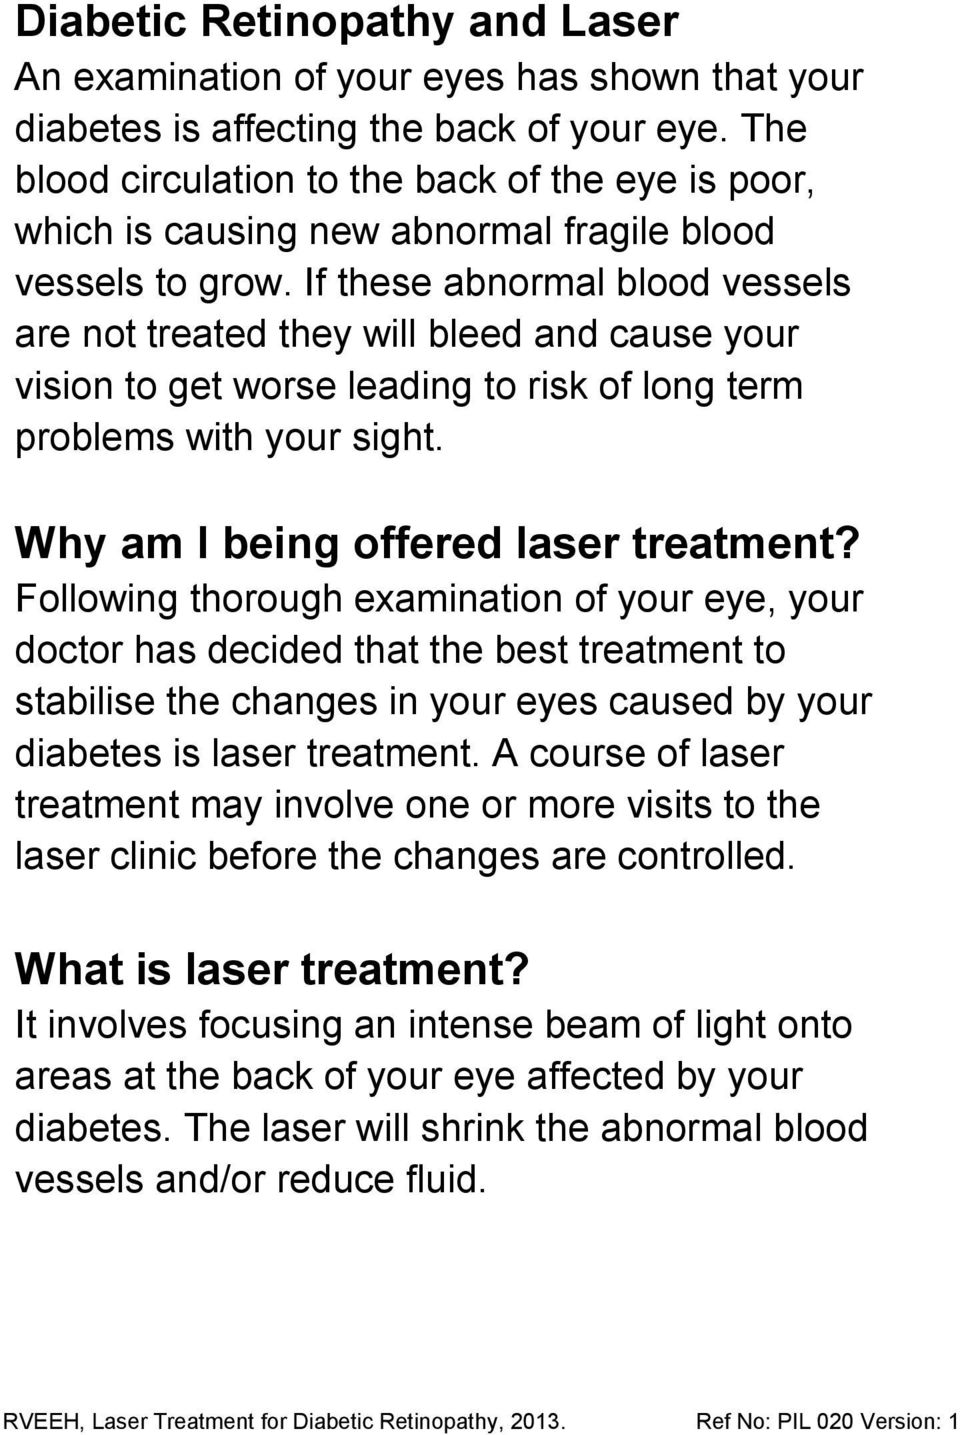 If these abnormal blood vessels are not treated they will bleed and cause your vision to get worse leading to risk of long term problems with your sight. Why am I being offered laser treatment?